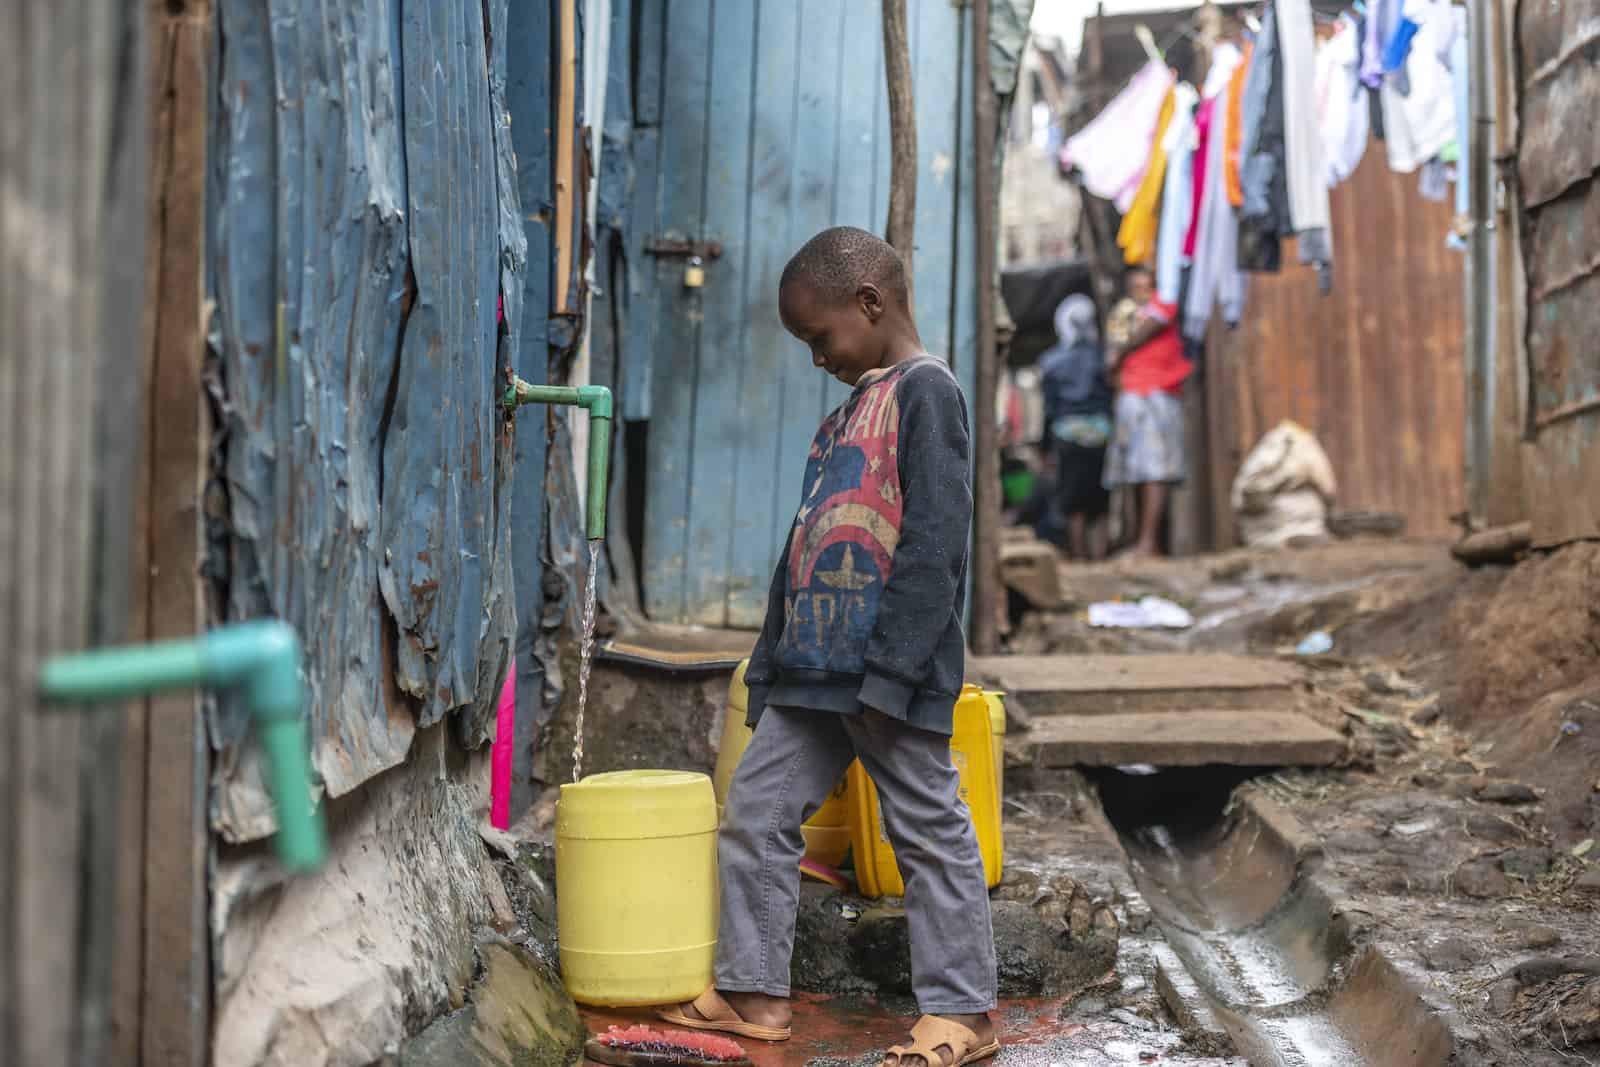 A boy stands in an alley filling a water jug at a tap.